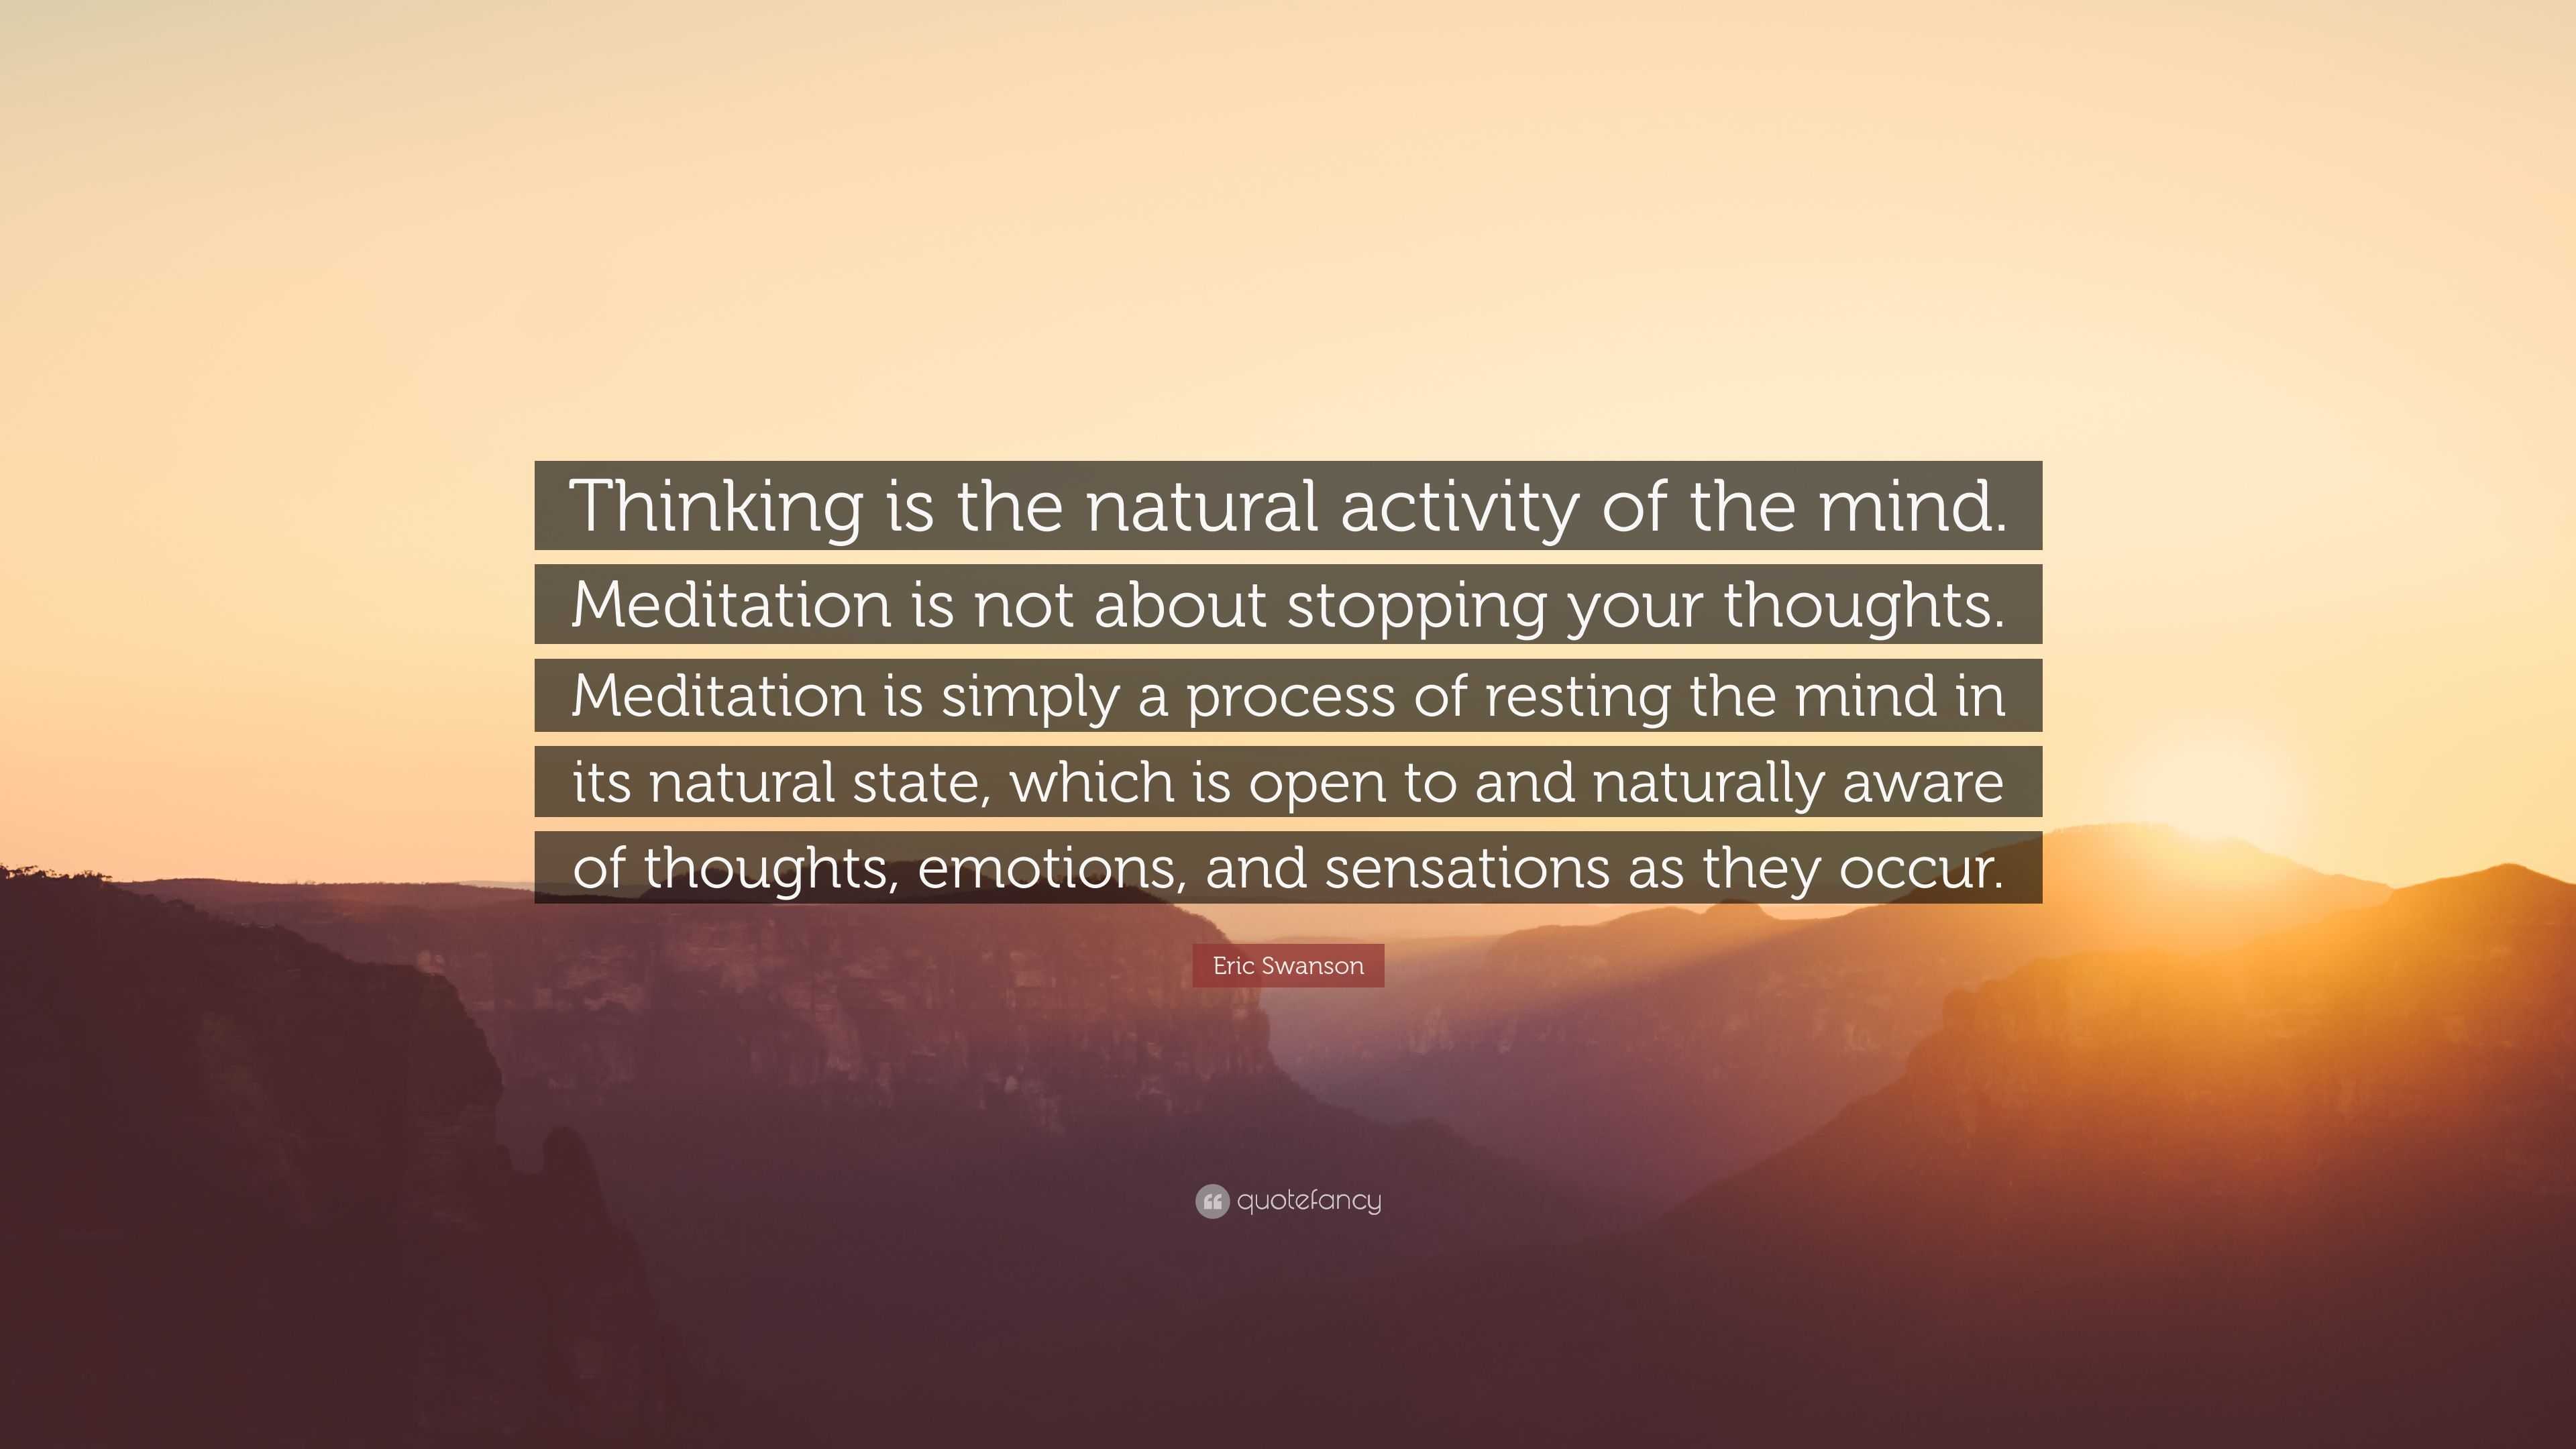 Eric Swanson Quote: “Thinking is the natural activity of the mind ...